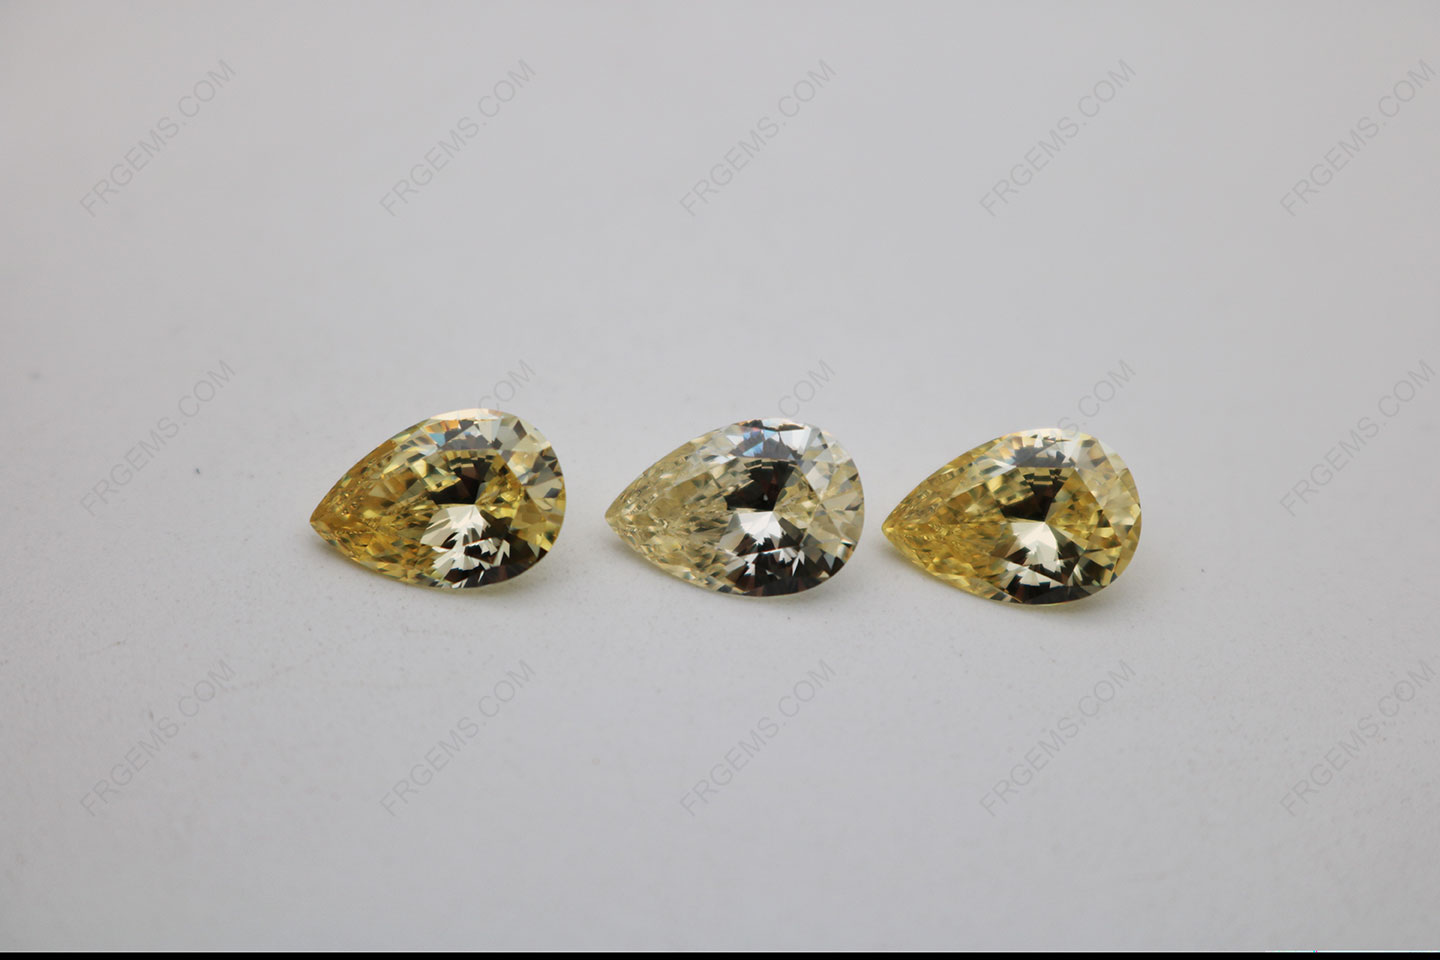 Cubic_Zirconia_Canary_Yellow_Pear_Shape_5A_Best_Quality_10x7mm_stones_China_Suppliers_IMG_2464